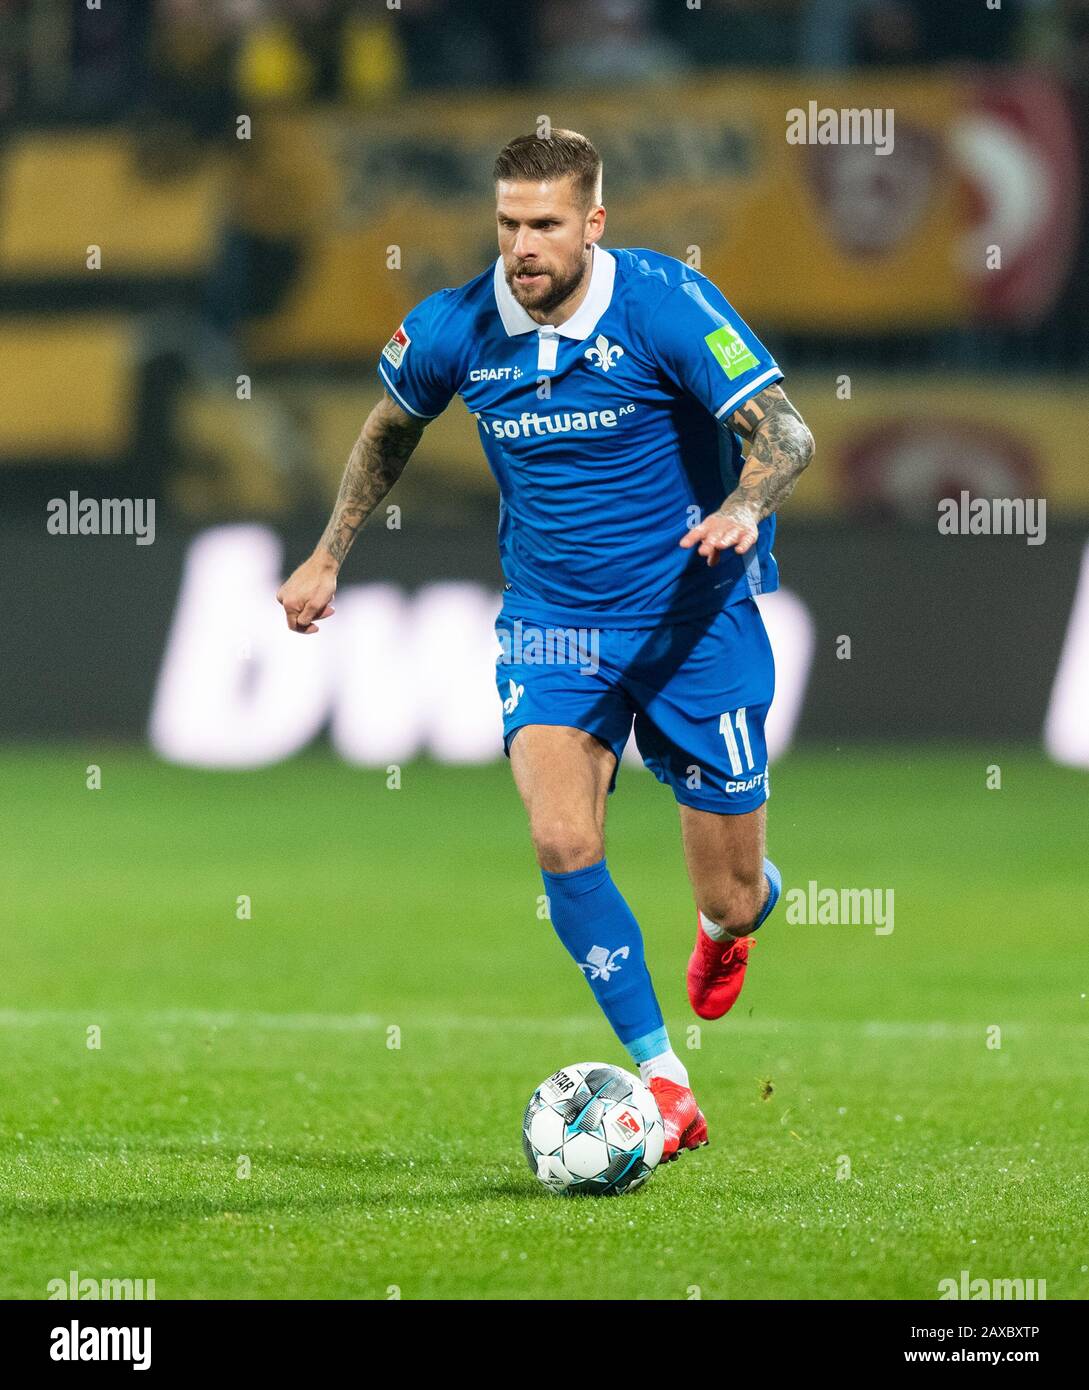 Dresden, Germany. 07th Feb, 2020. Football: 2nd Bundesliga, SG Dynamo Dresden - SV Darmstadt 98, 21st matchday, at the Rudolf Harbig Stadium. Darmstadt's Tobias Kempe plays the ball. Credit: Robert Michael/dpa-Zentralbild/dpa - IMPORTANT NOTE: In accordance with the regulations of the DFL Deutsche Fußball Liga and the DFB Deutscher Fußball-Bund, it is prohibited to exploit or have exploited in the stadium and/or from the game taken photographs in the form of sequence images and/or video-like photo series./dpa/Alamy Live News Stock Photo